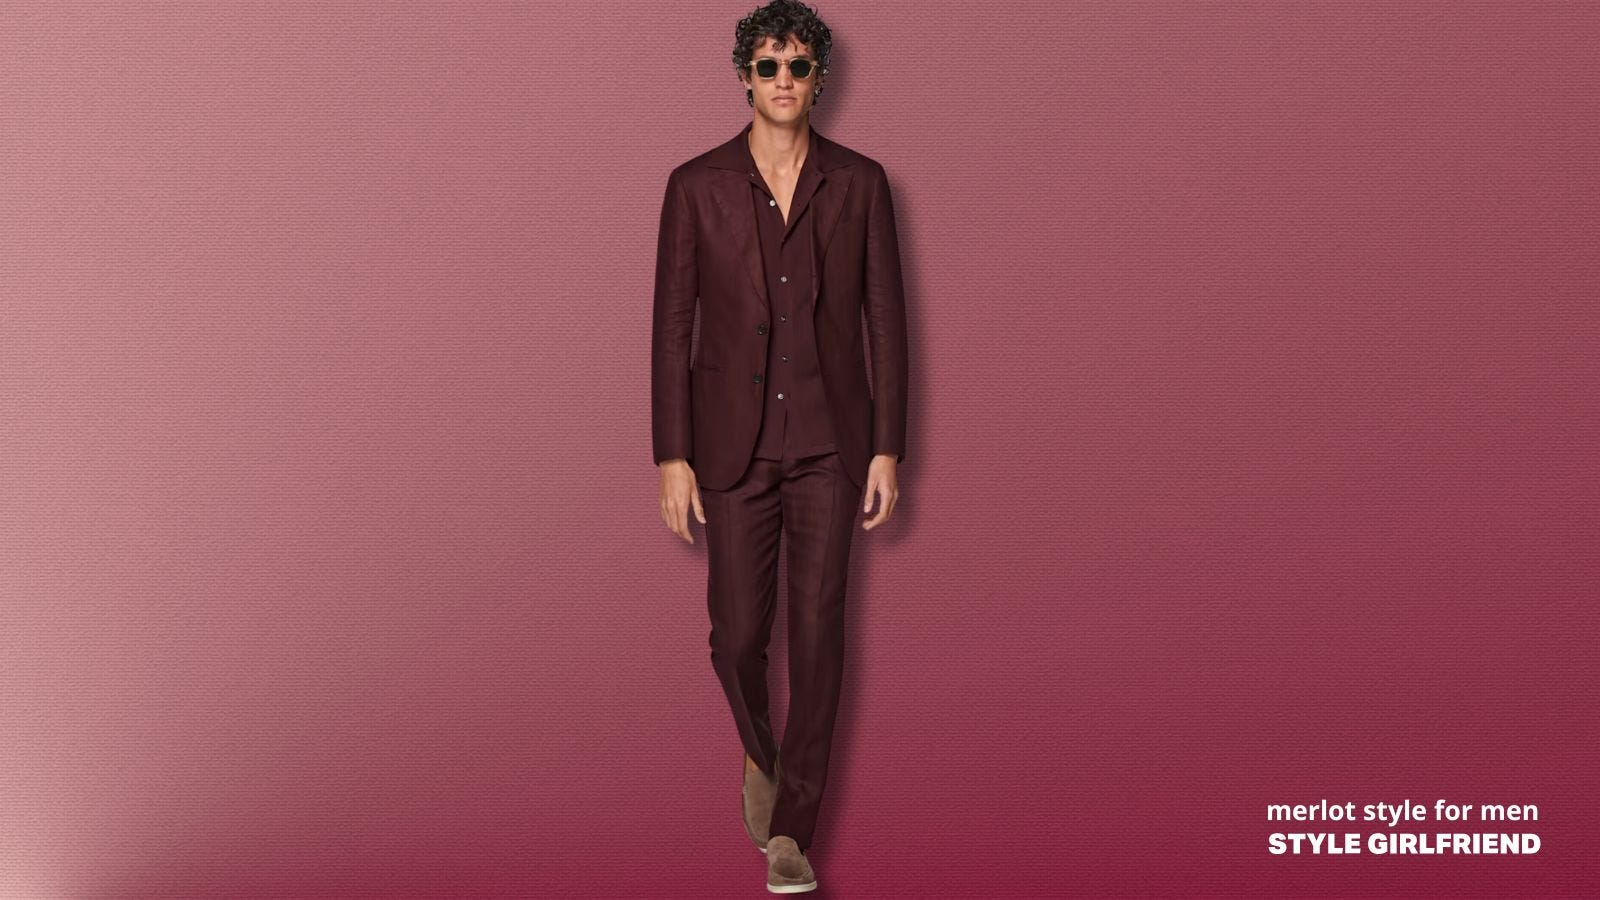 How to wear burgundy and olive together